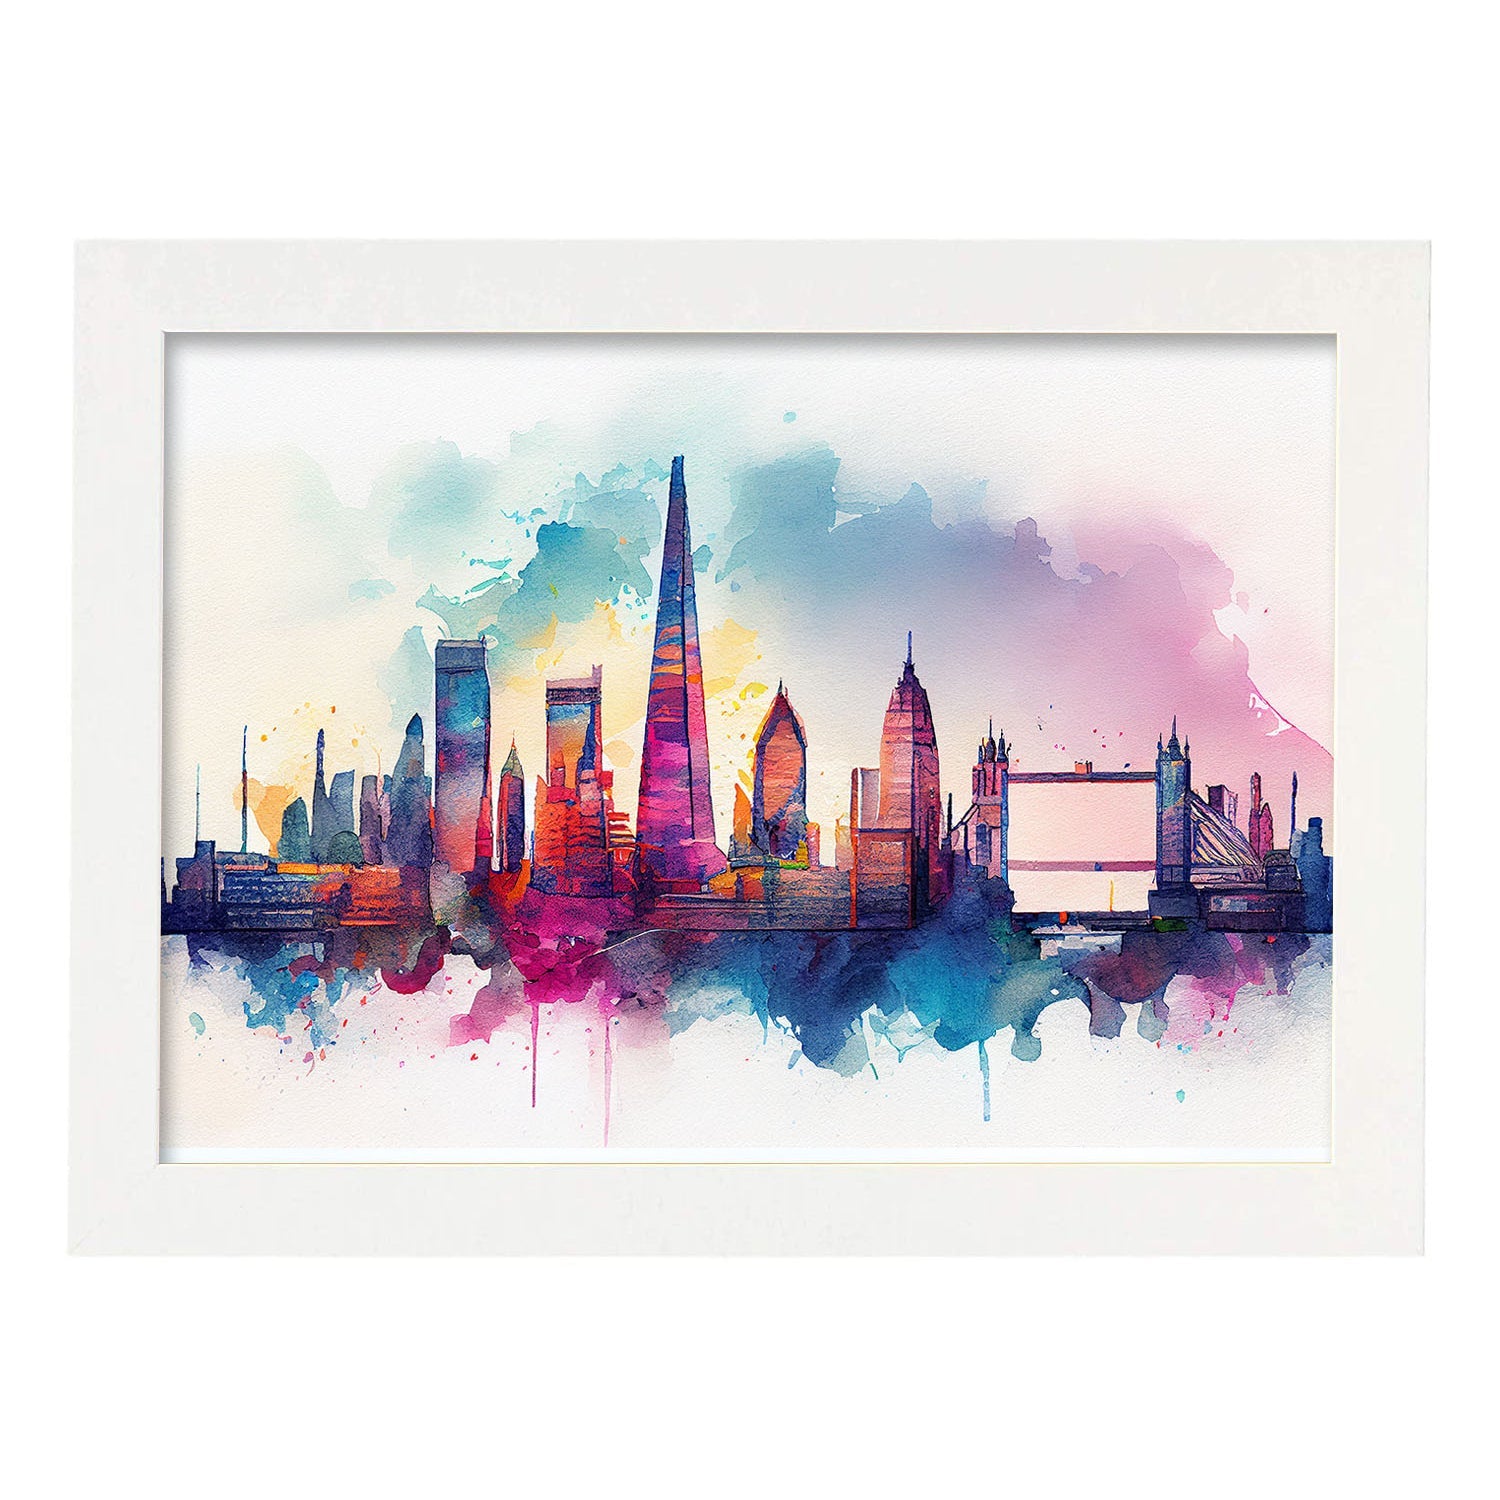 Nacnic watercolor of a skyline of the city of London_2. Aesthetic Wall Art Prints for Bedroom or Living Room Design.-Artwork-Nacnic-A4-Marco Blanco-Nacnic Estudio SL